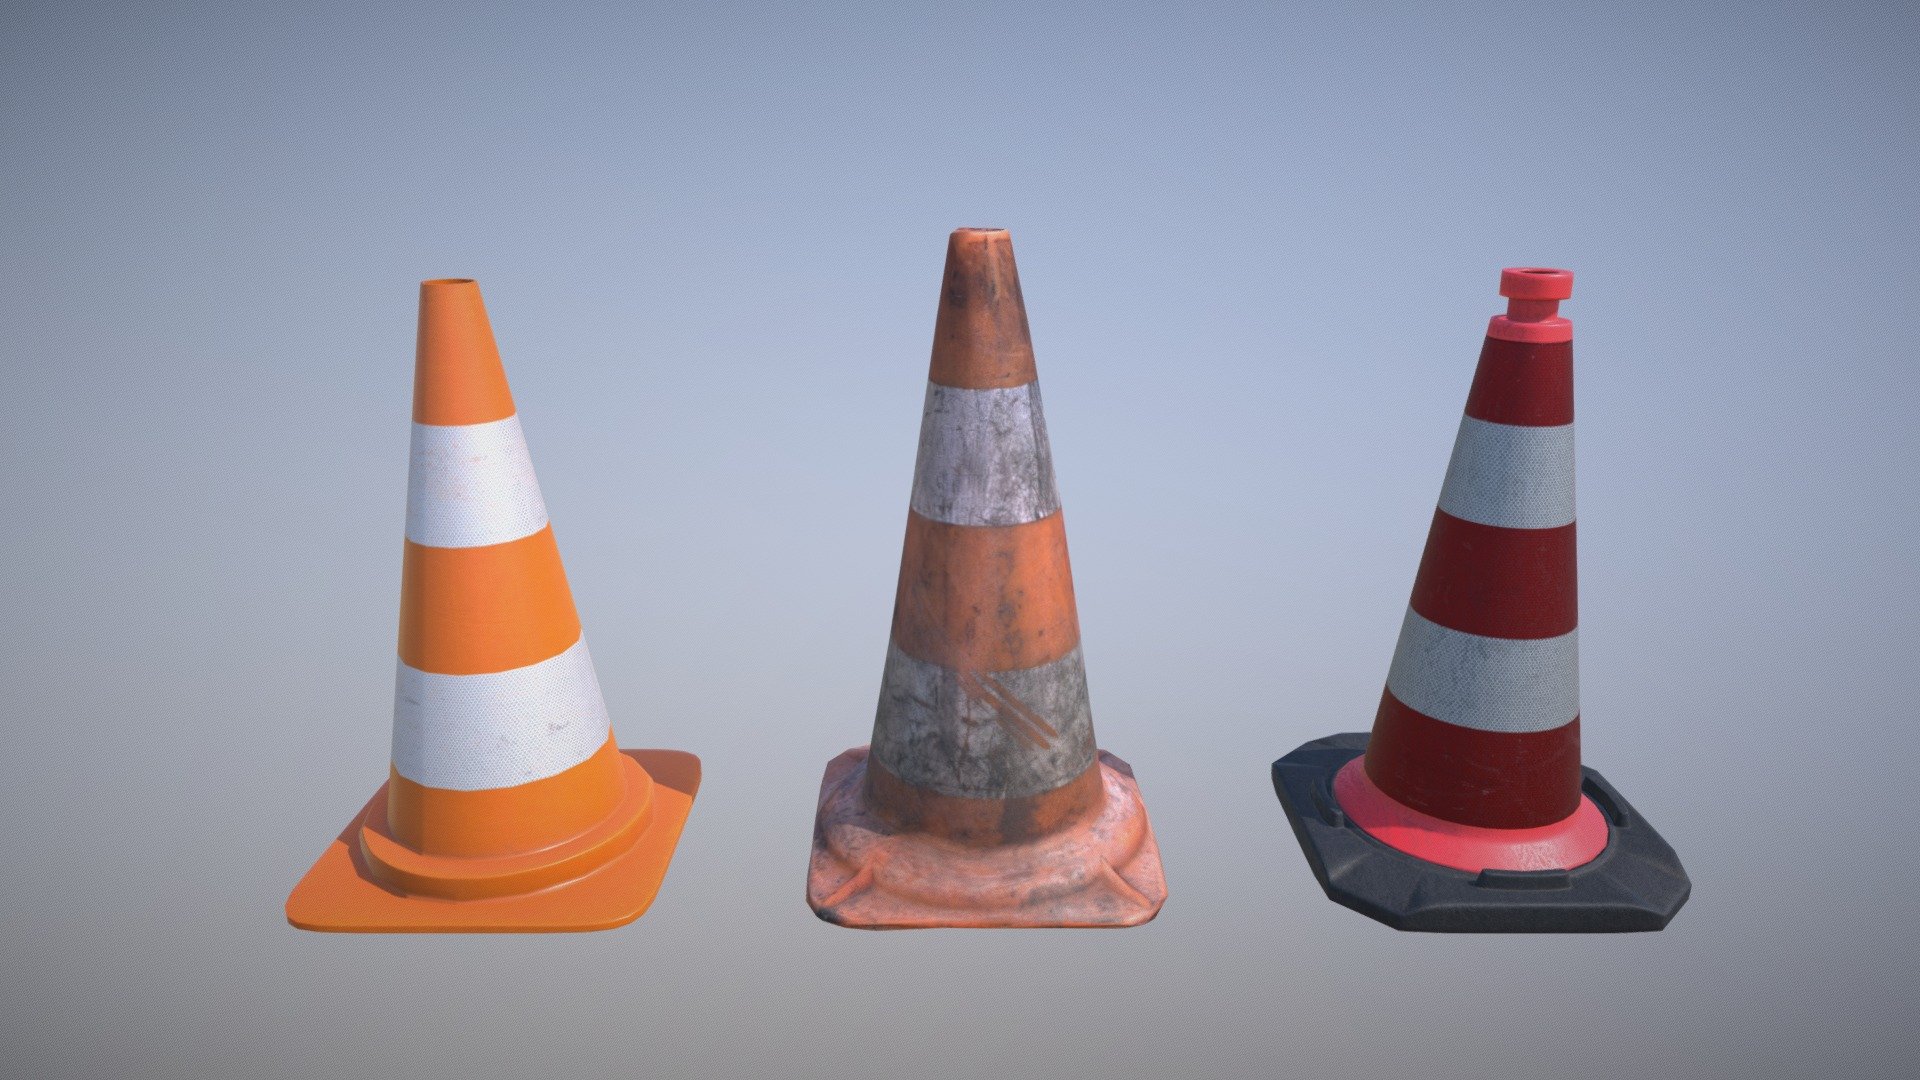 Trafic Cone / Pilon pack of three models, 2 modelled, 1 photoscanned. 360 Degrees, cleaned, decimated, UV’ed &amp; PBR Textured.
Texture Set




2048x2048 / PNG

Albedo (Diffuse) / Roughness / Normal (OpenGL) / Ambient Occlusion / Metallic (if Applicable)

Additional information




Real World Scale

Z up

Free of all legal issues as all branding and labels are made up, adjusted or removed.

Additional files




None

Disclaimer
If you need any support or assistance, or have feedback/questions, you can comment below or mail me and I will respond as quickly as possible.
High Poly Scan and Texture available upon request. 

Check out my other models and photoscans by following the link below.

Contact: hello@notoir.xyz 

More: https://notoir.xyz/featured-links/

Follow me on:
Instagram
Twitter
Artstation - [PACK] Traffic Cones Pilons / LP / PBR - Buy Royalty Free 3D model by NOTOIR.XYZ (@Notoir) 3d model